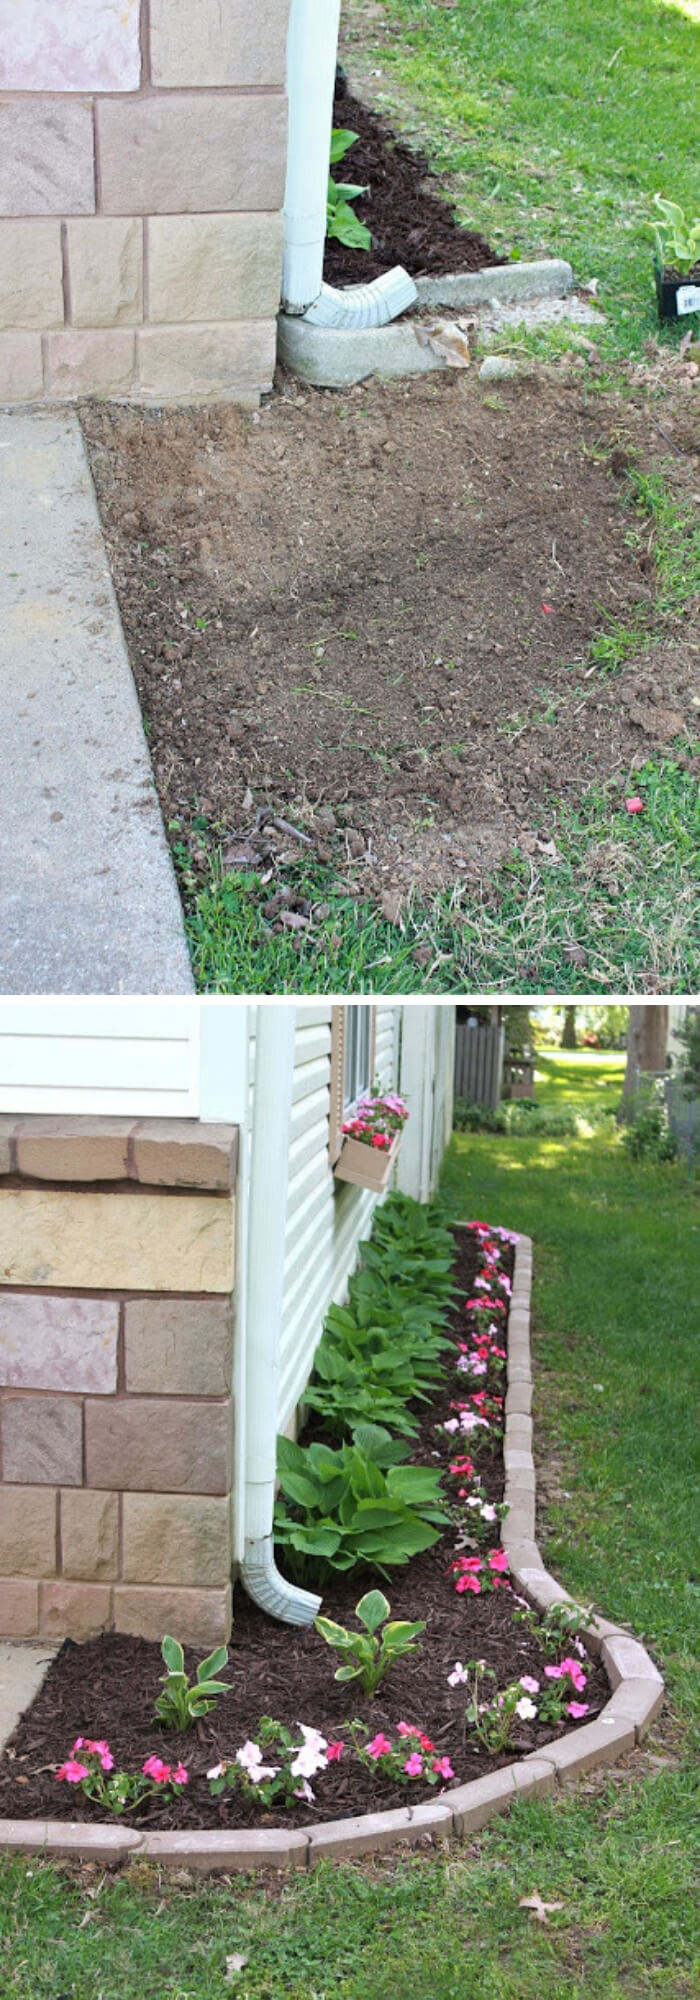 Flower bed under the downspout | Best Downspout landscaping ideas